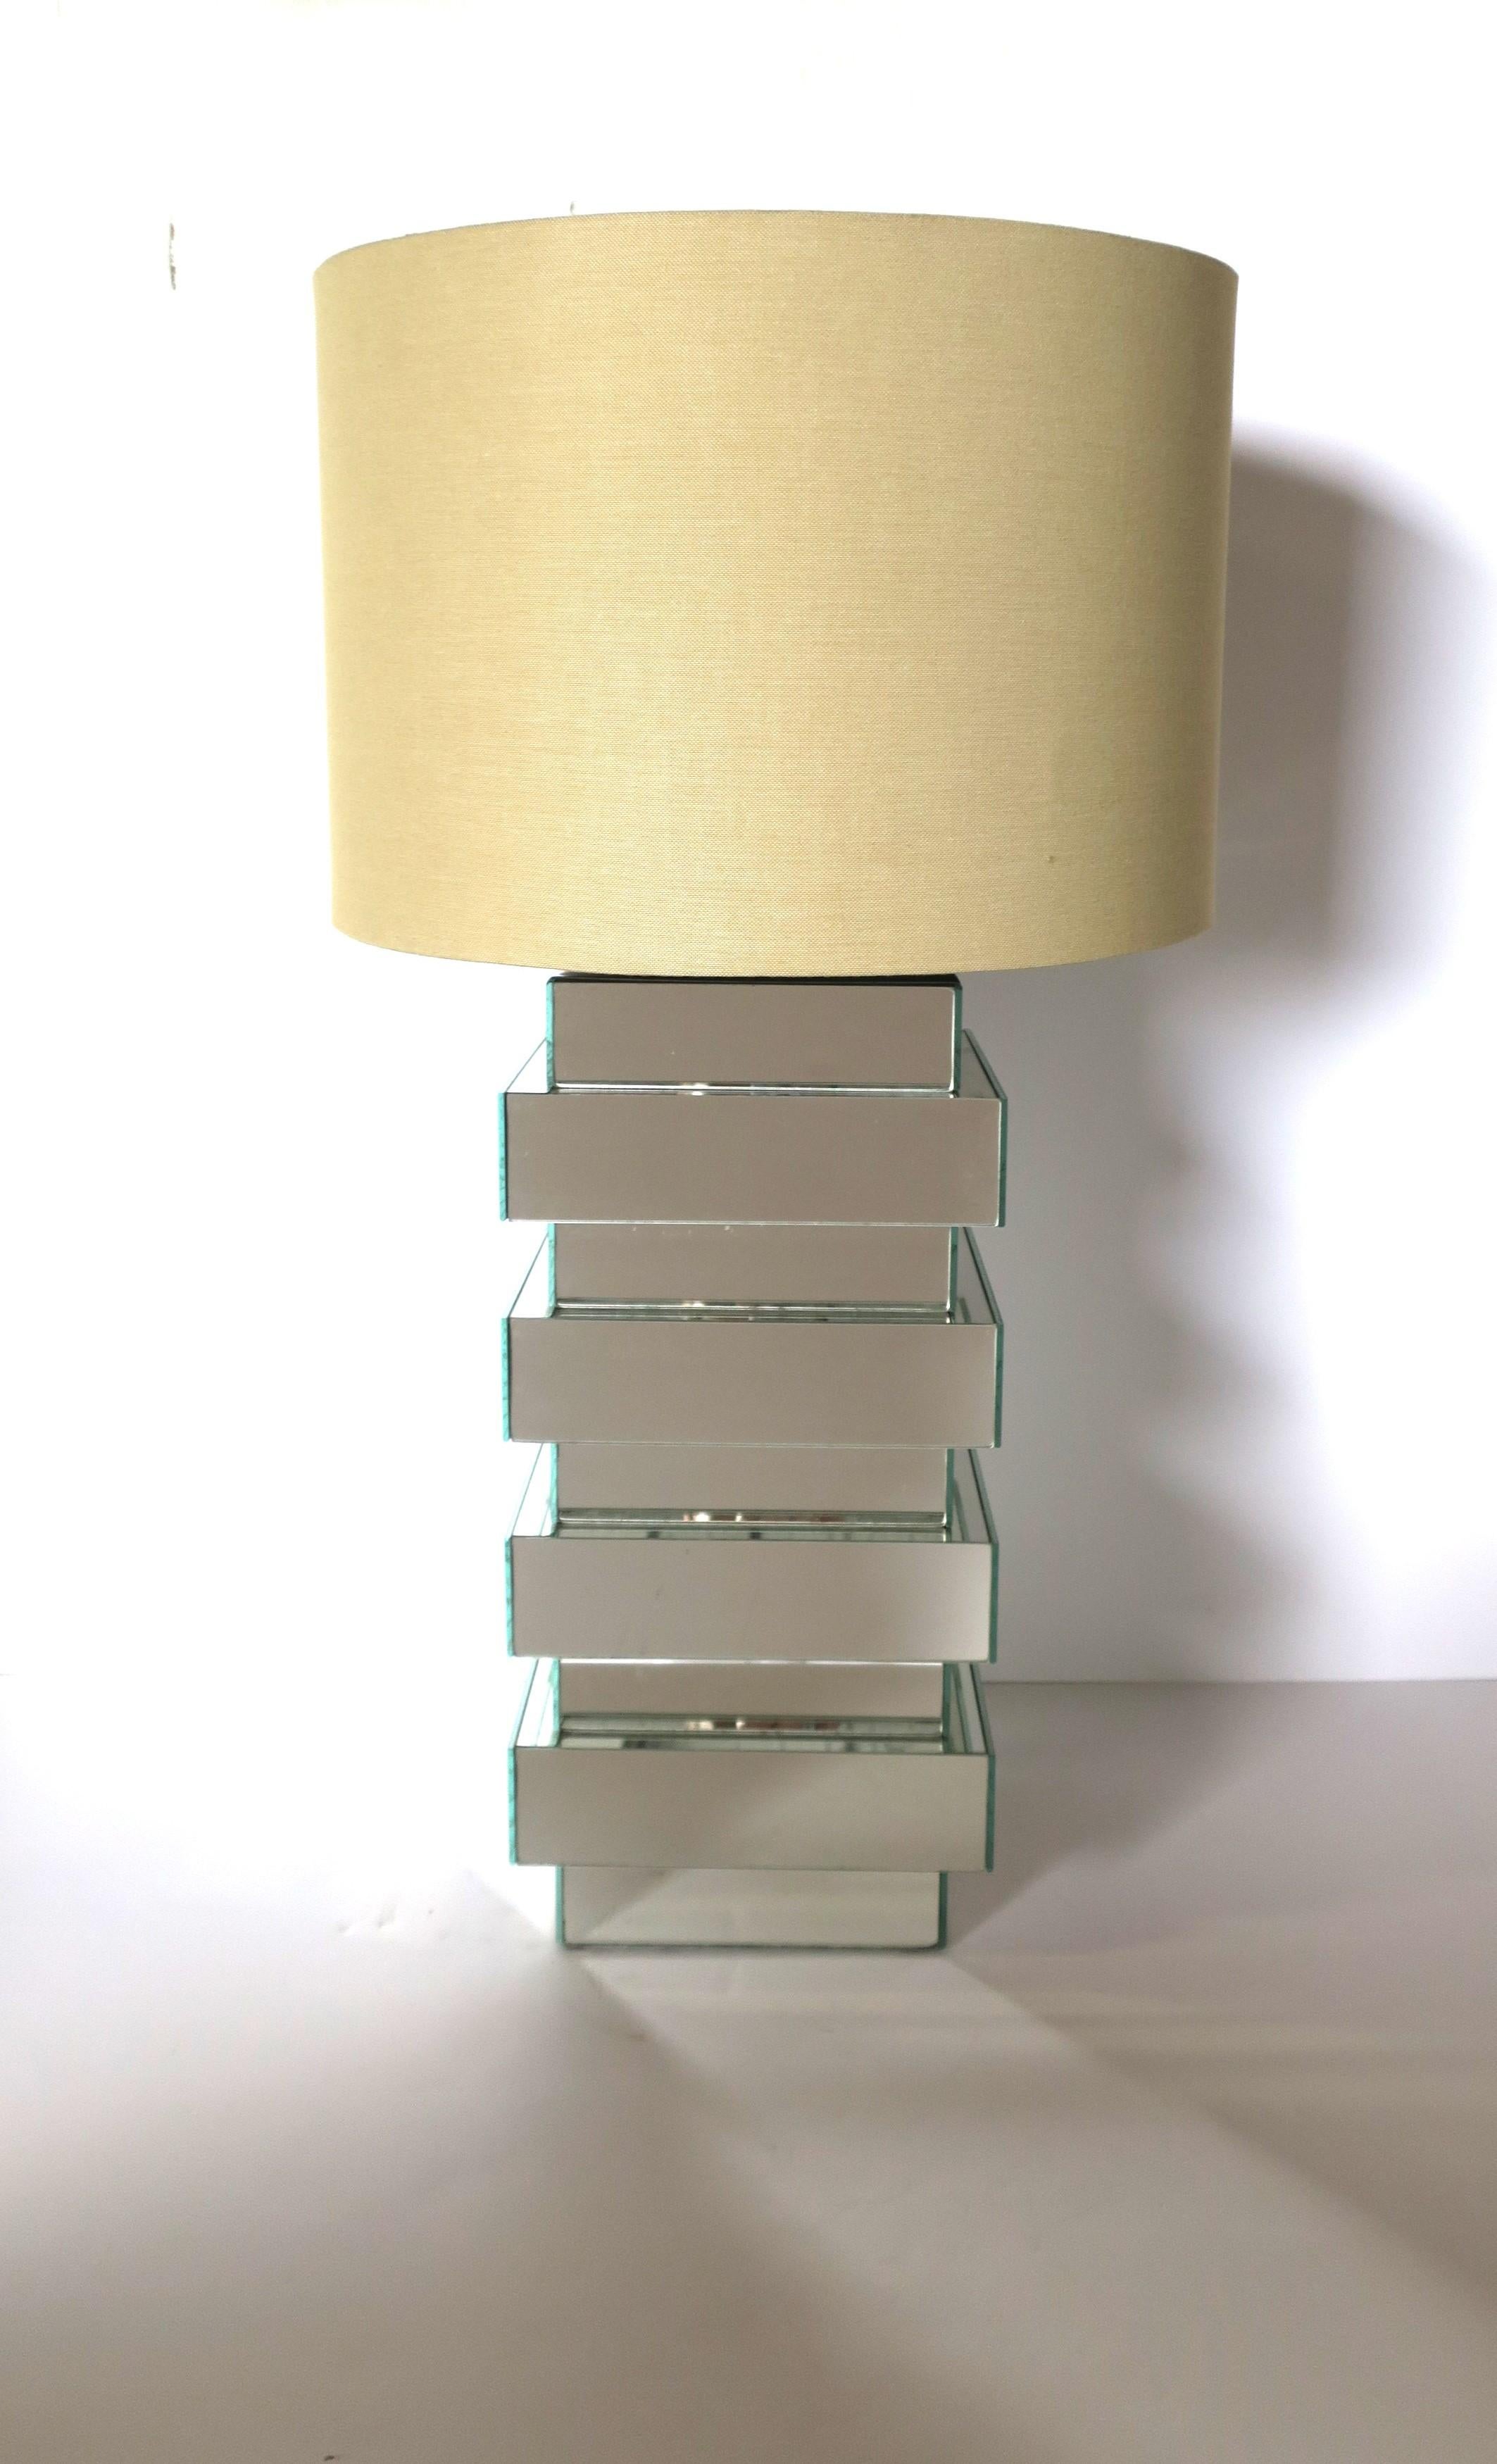 Late 20th Century Modern Postmodern Mirrored Table Lamp, circa 1970s For Sale